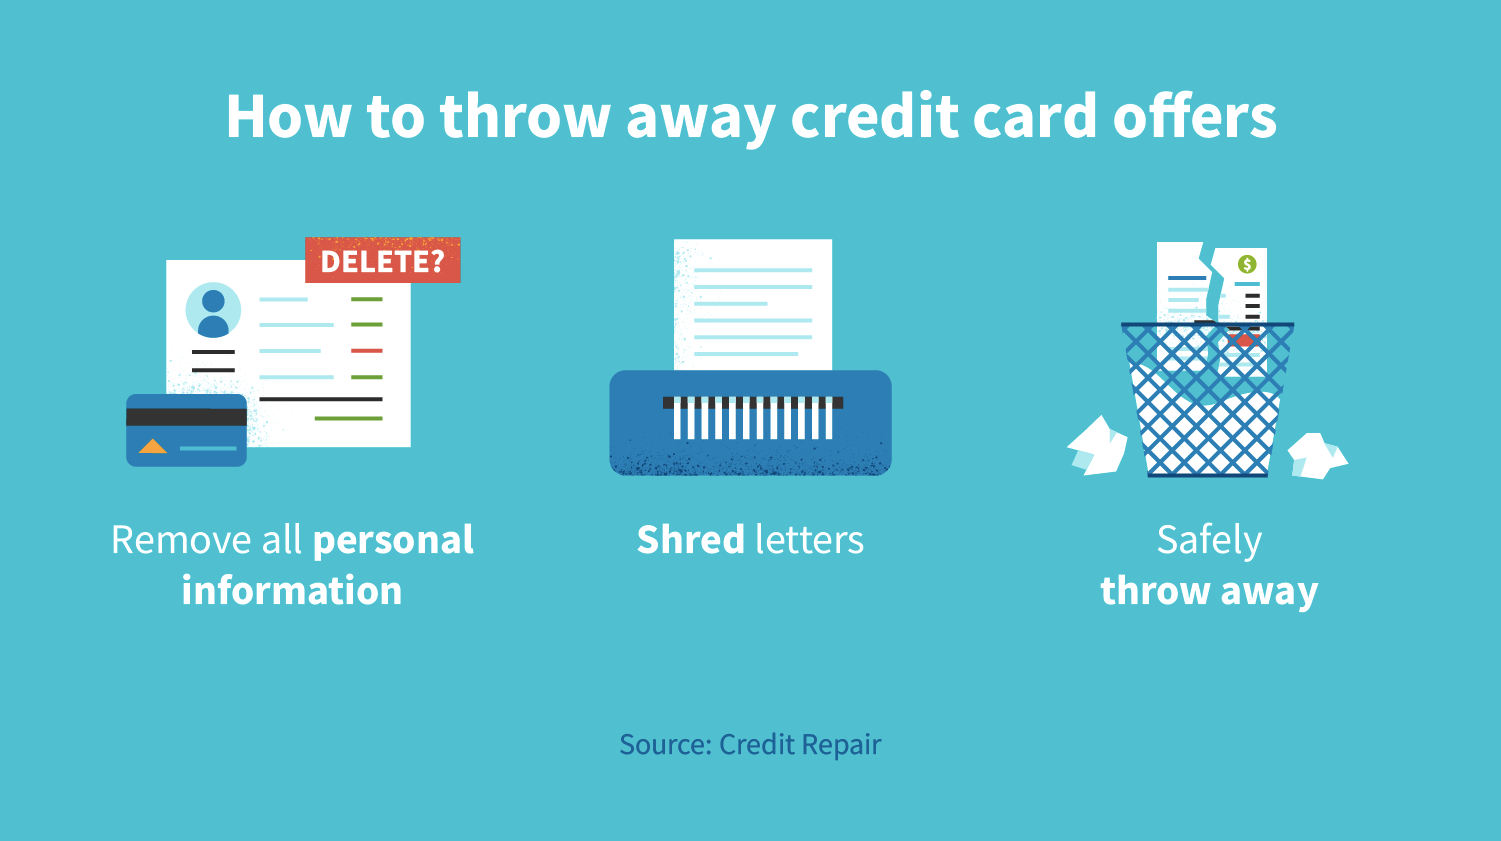 How to throw away credit card offers